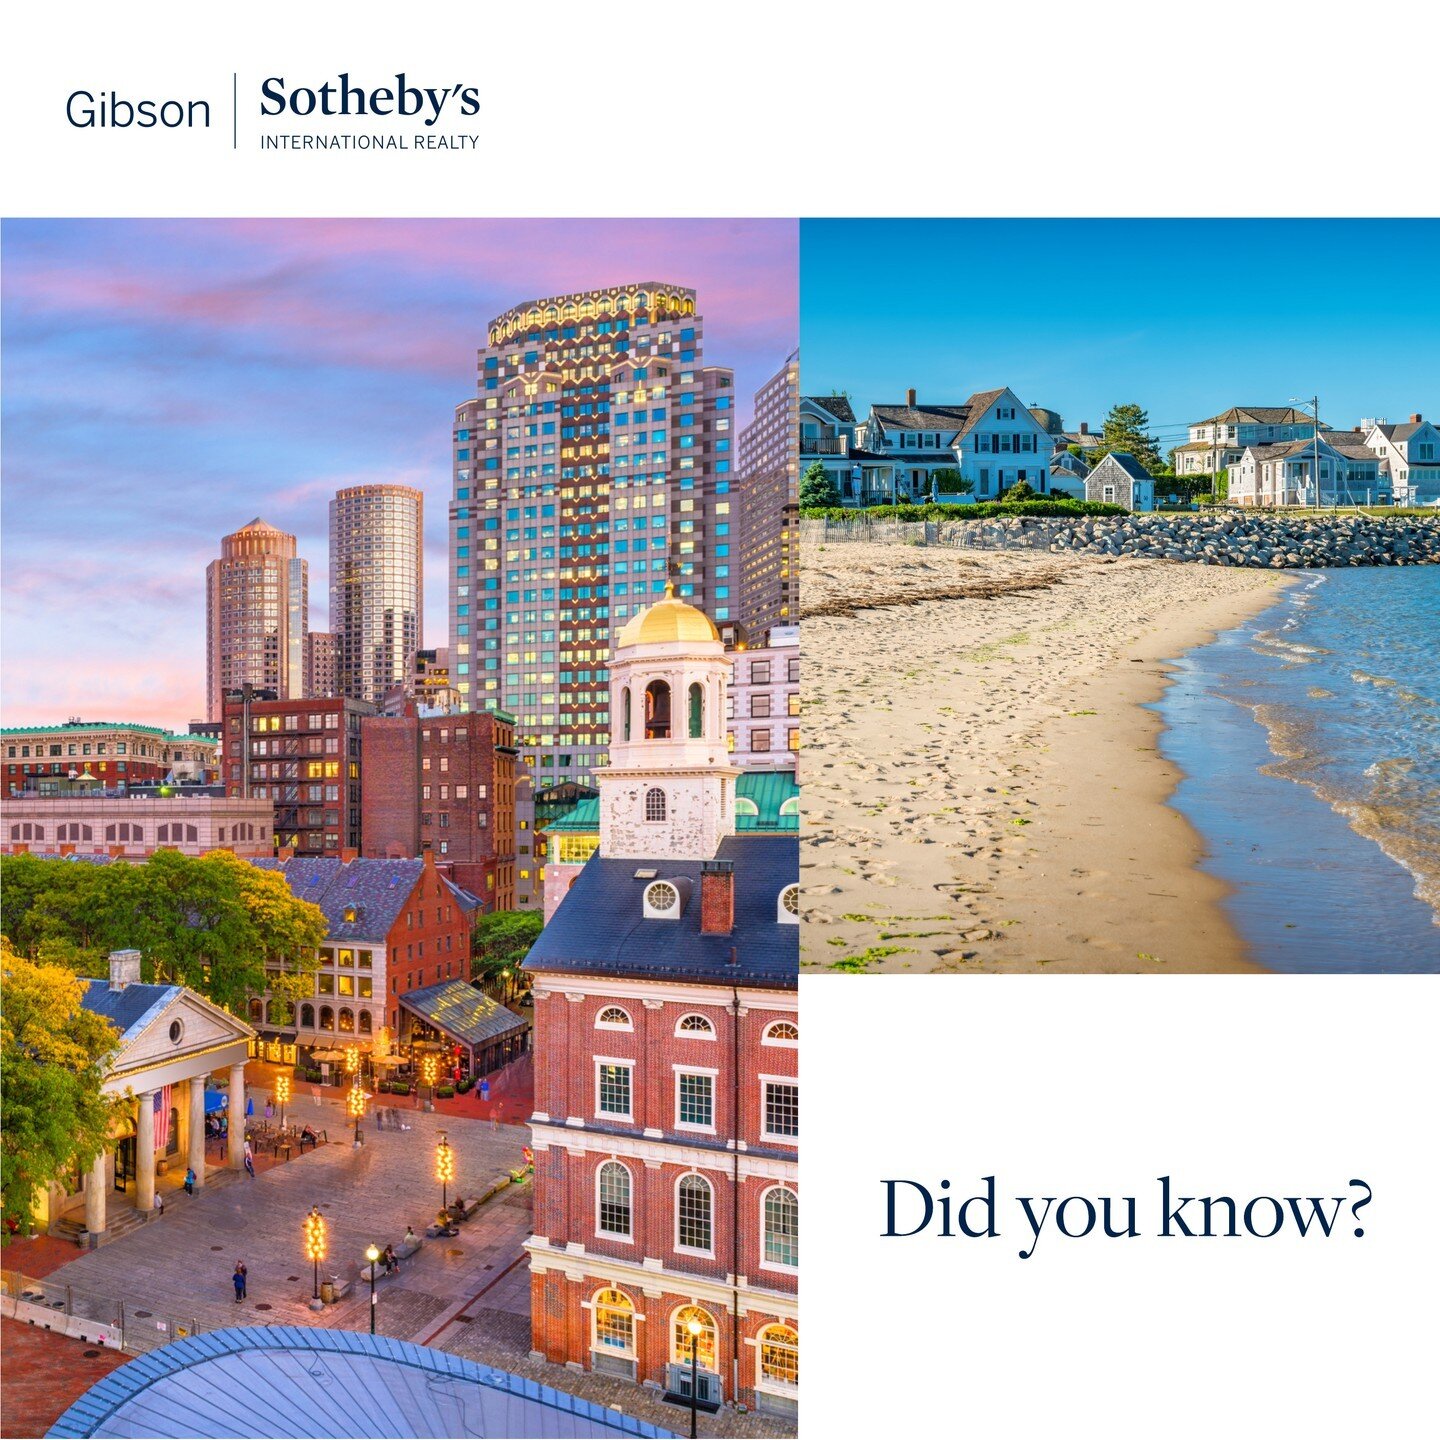 Gibson Sotheby's International Realty offers complete Relocation &amp; Referral services, designed to make a transition to life in Massachusetts smooth and seamless. If you're considering making Massachusetts your home, I would be honored to assist y